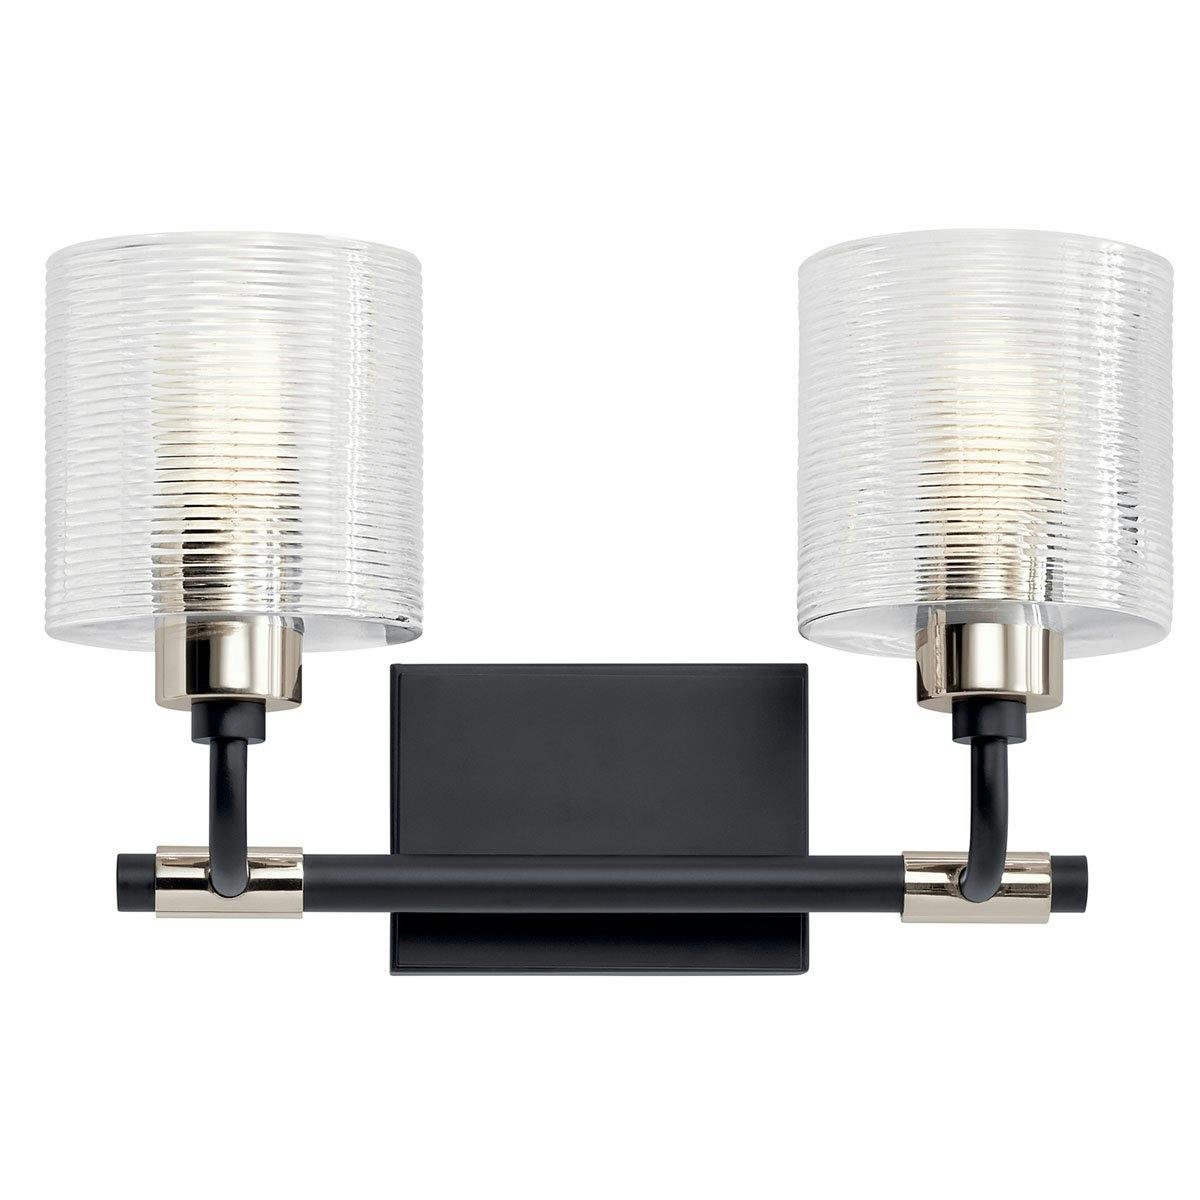 Front view of the Harvan 15" 2 Light Vanity Light Black on a white background